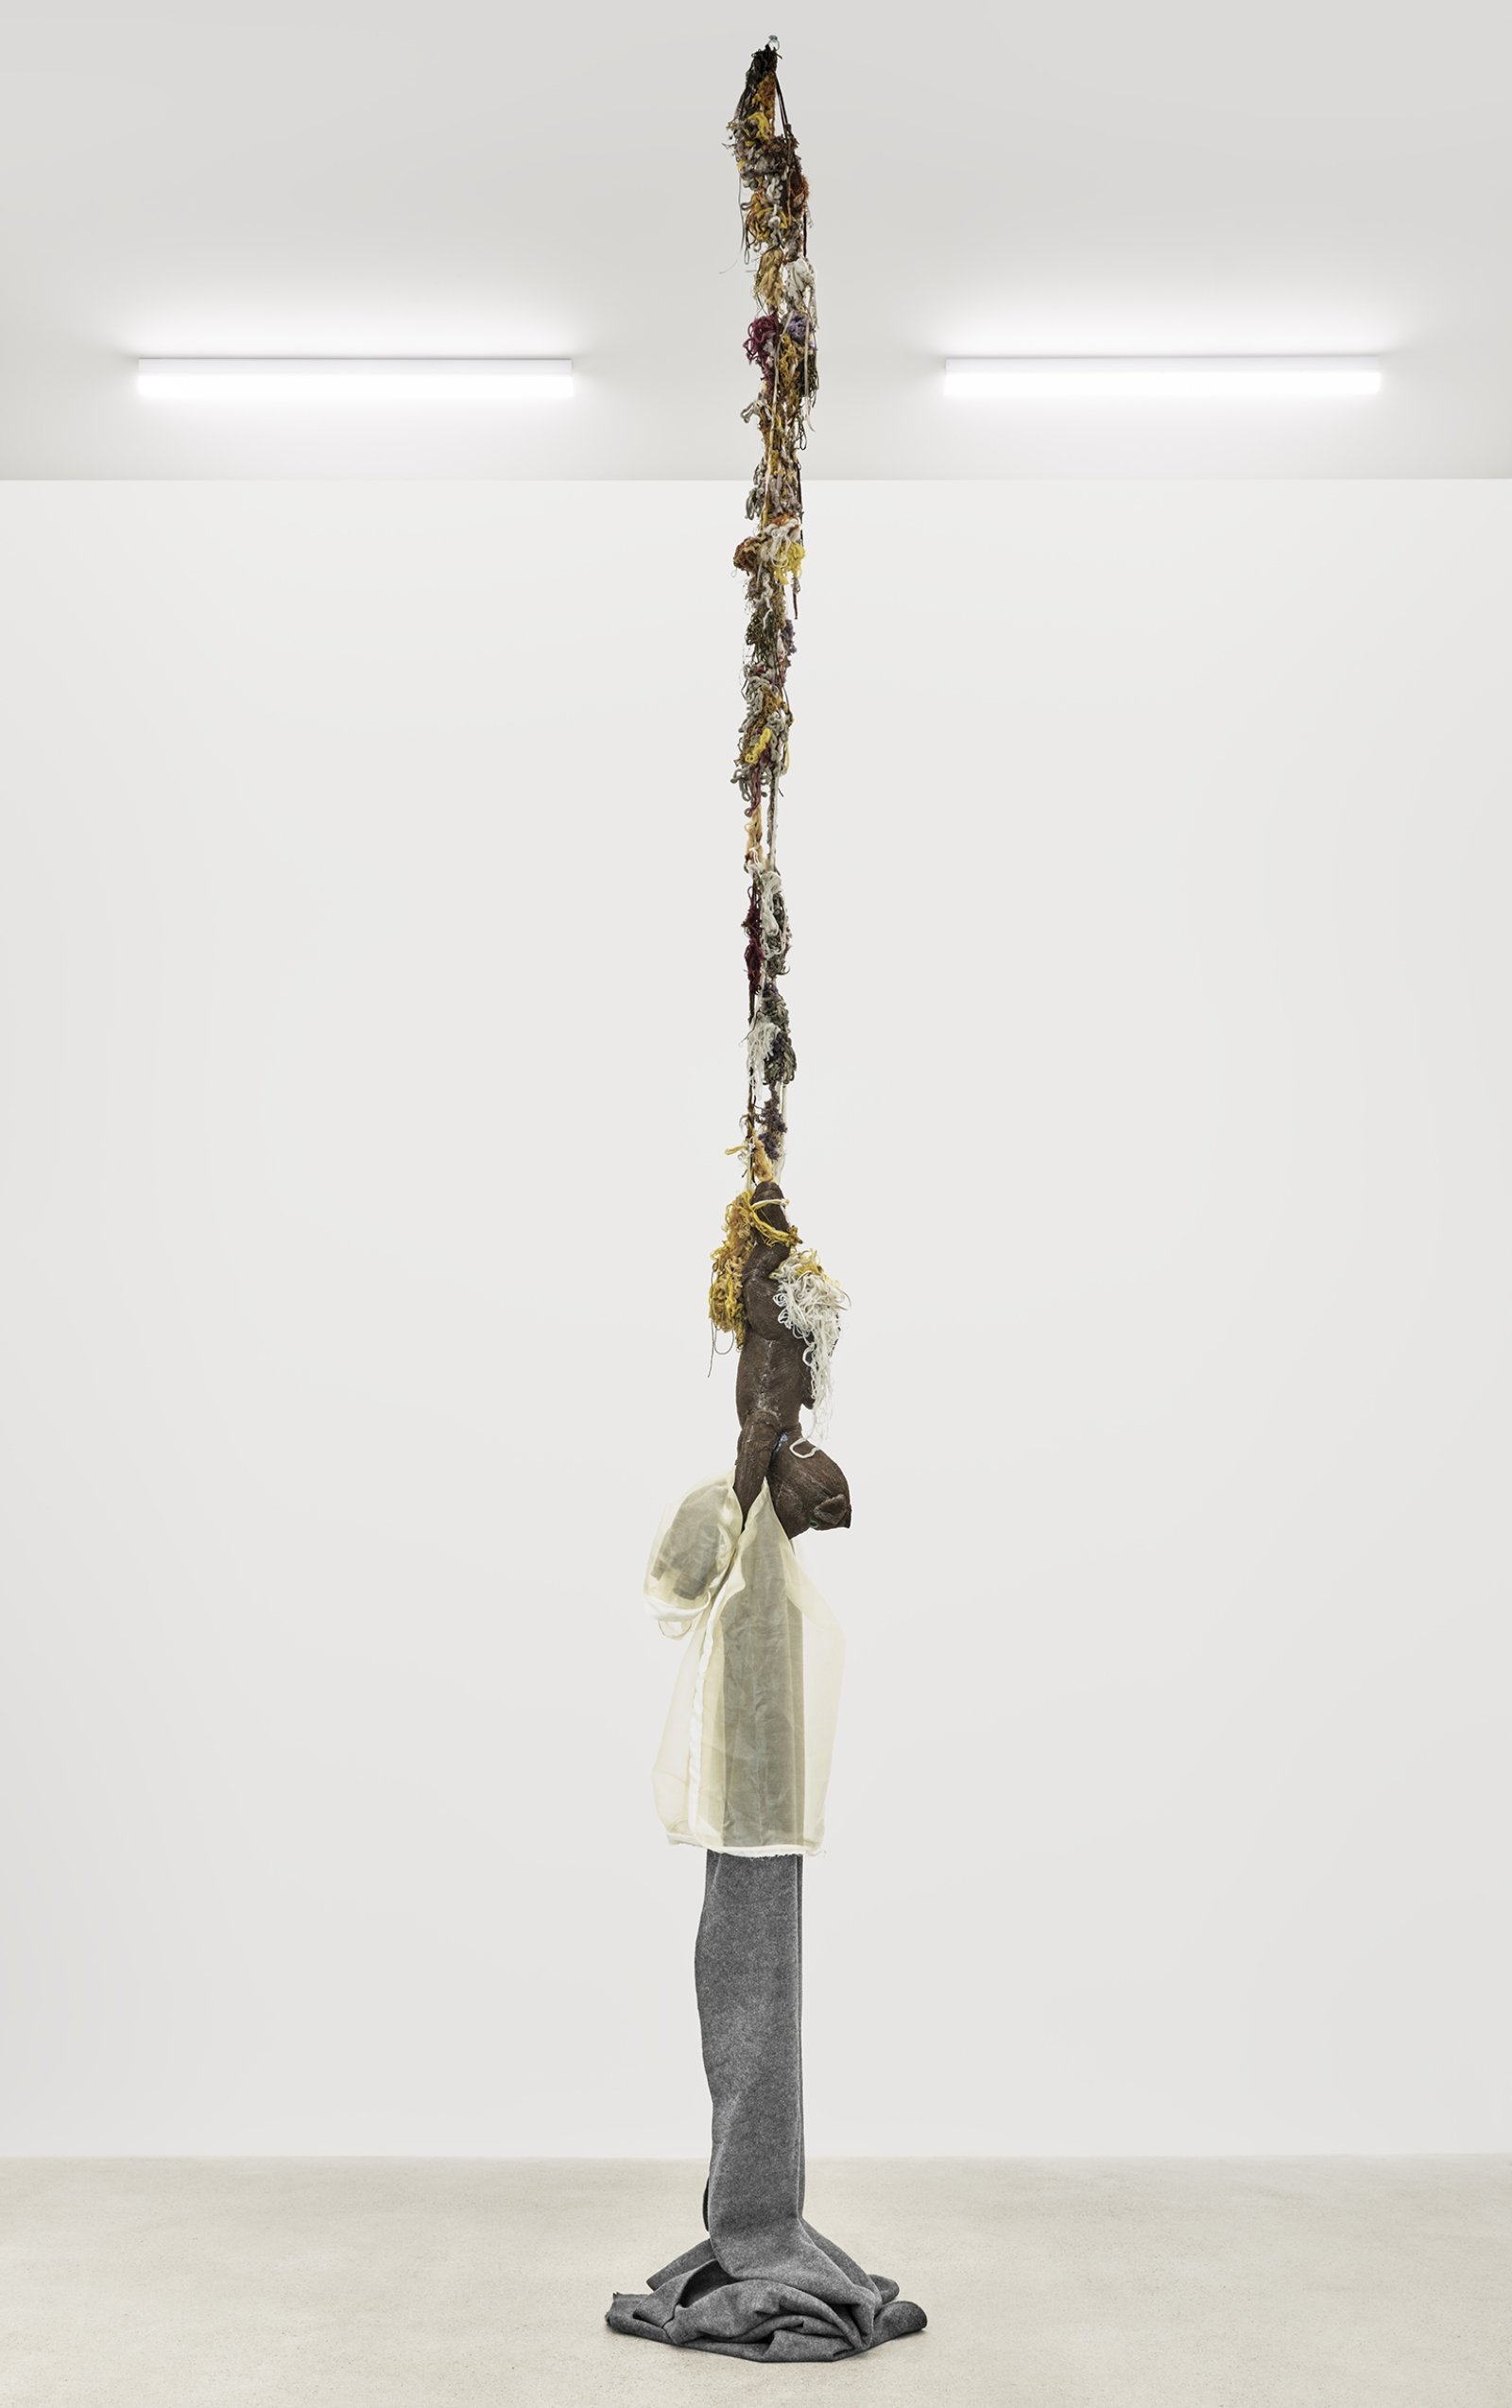 Liz Magor, Delivery (brown), 2018, silicone rubber, textiles, twine, 144 x 25 x 21 in. (366 x 62 x 52 cm)